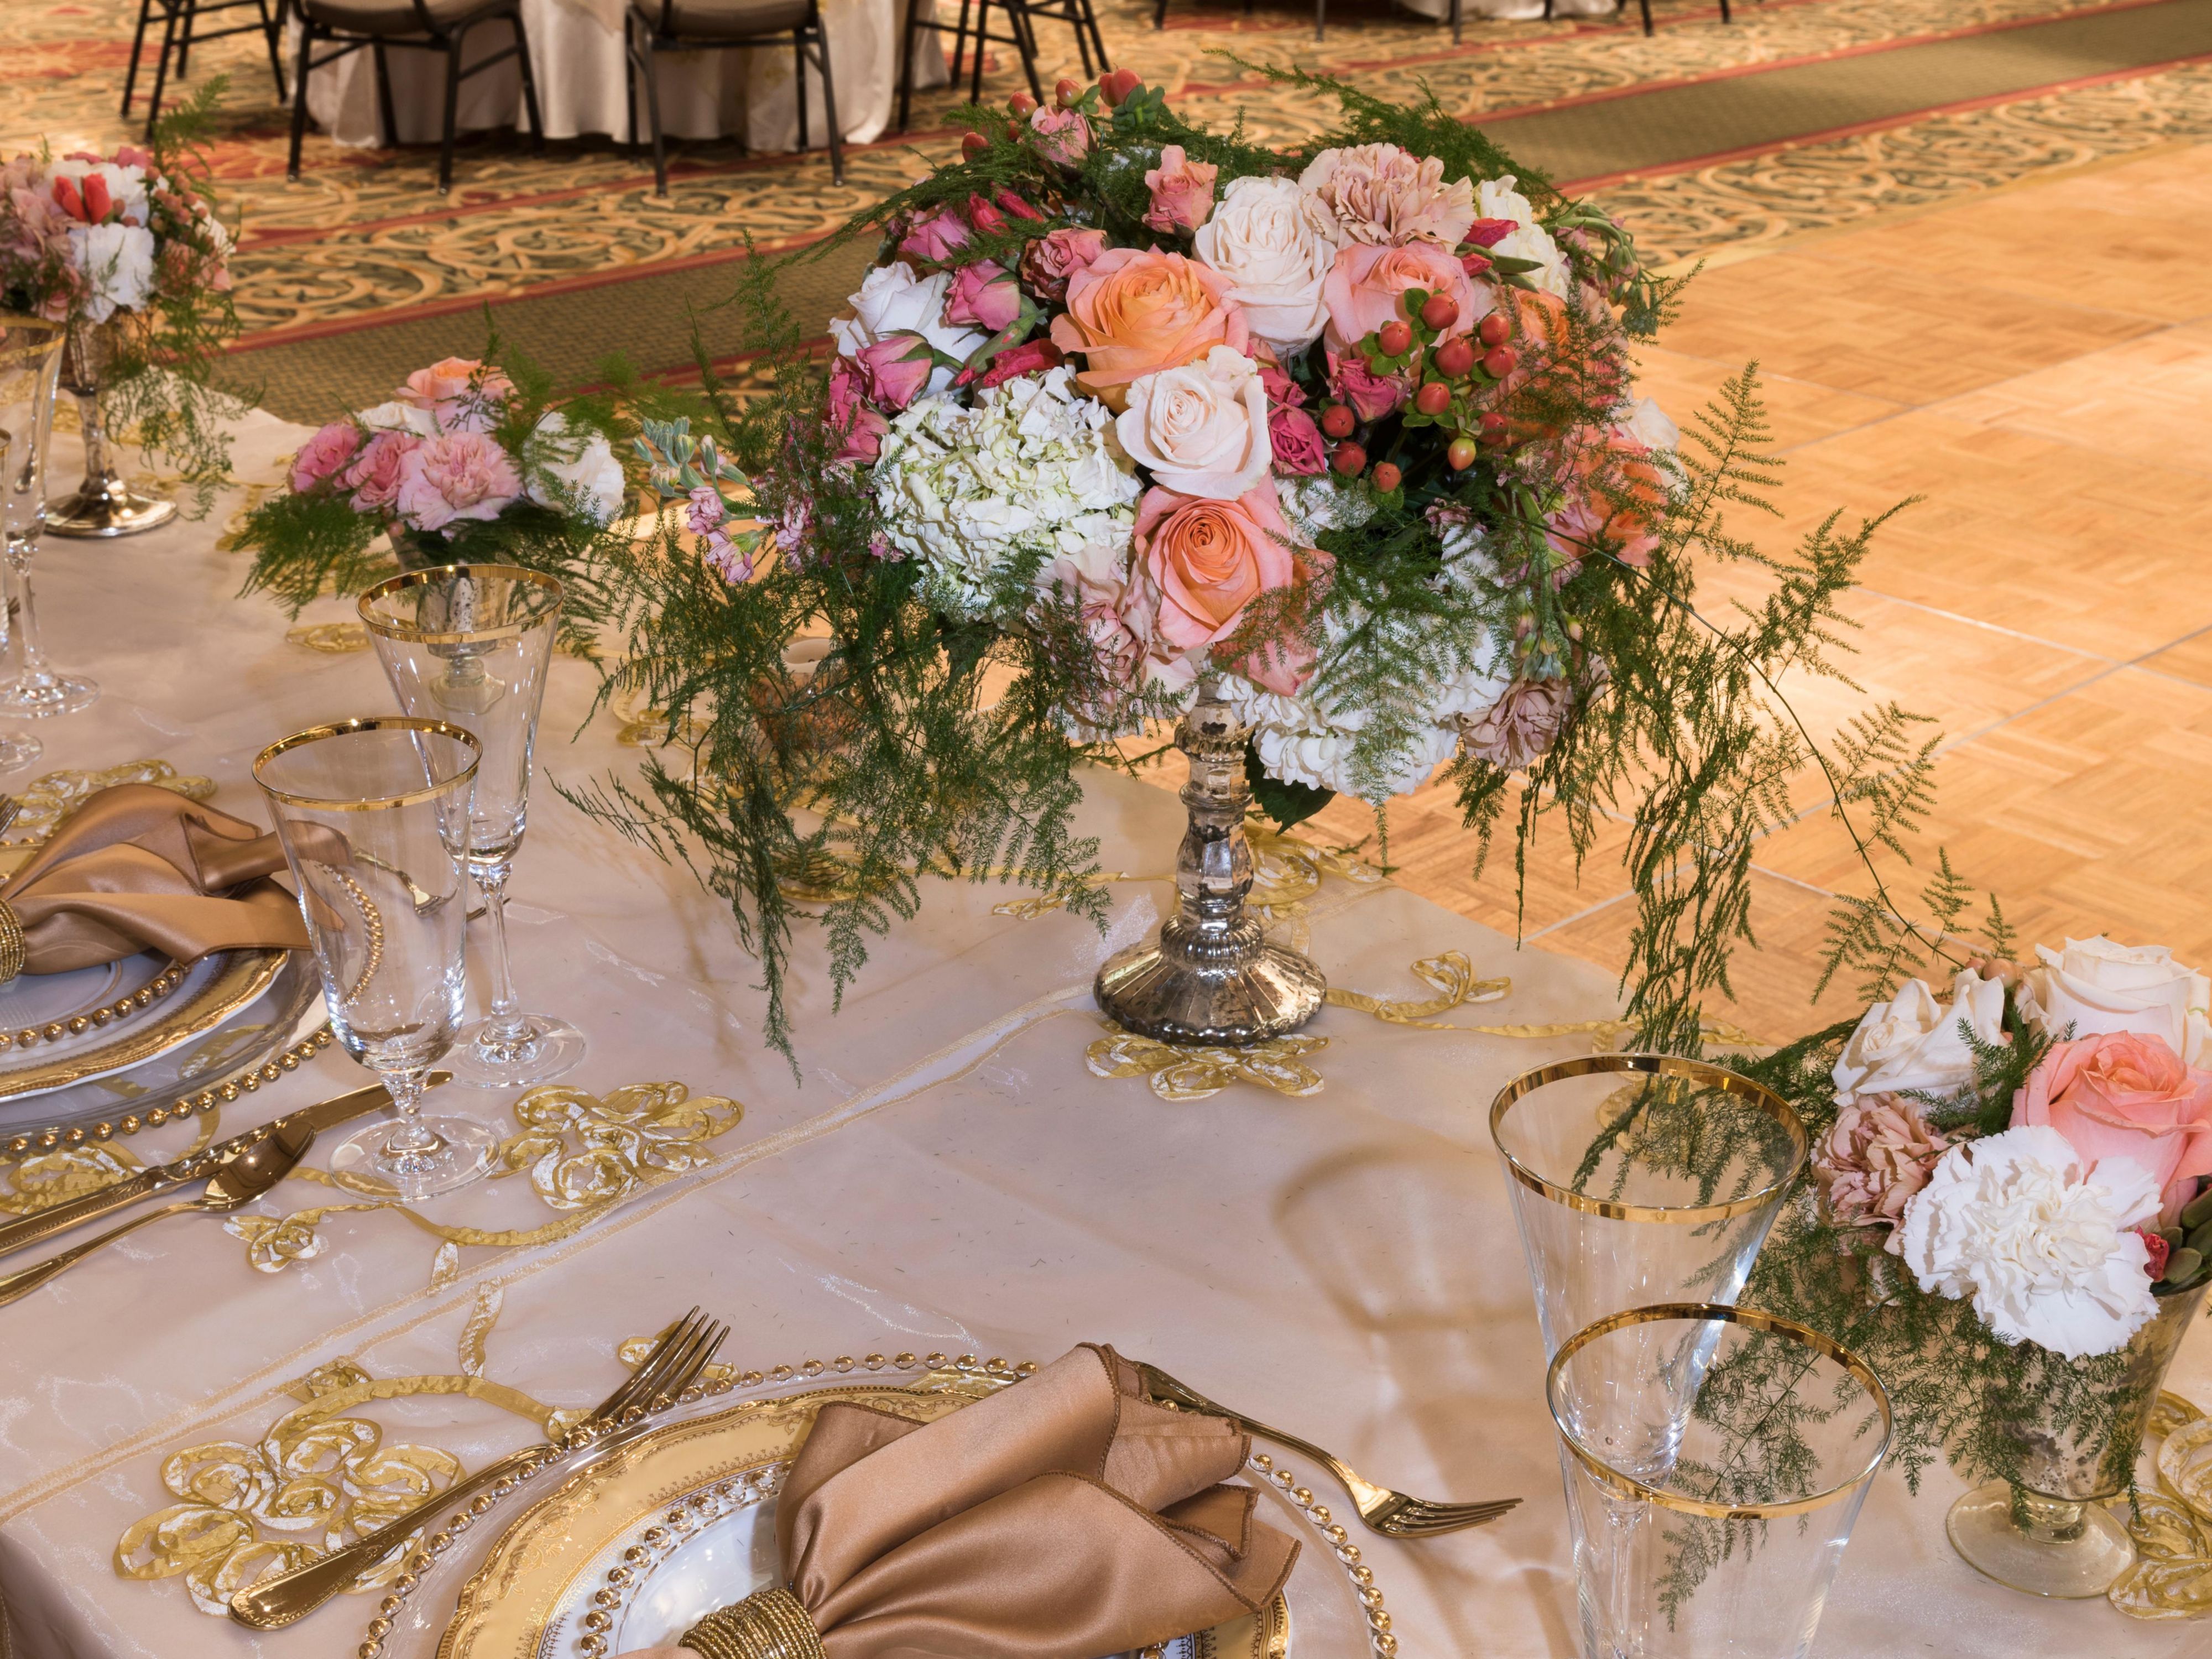 Long bridal table with flowerscapes